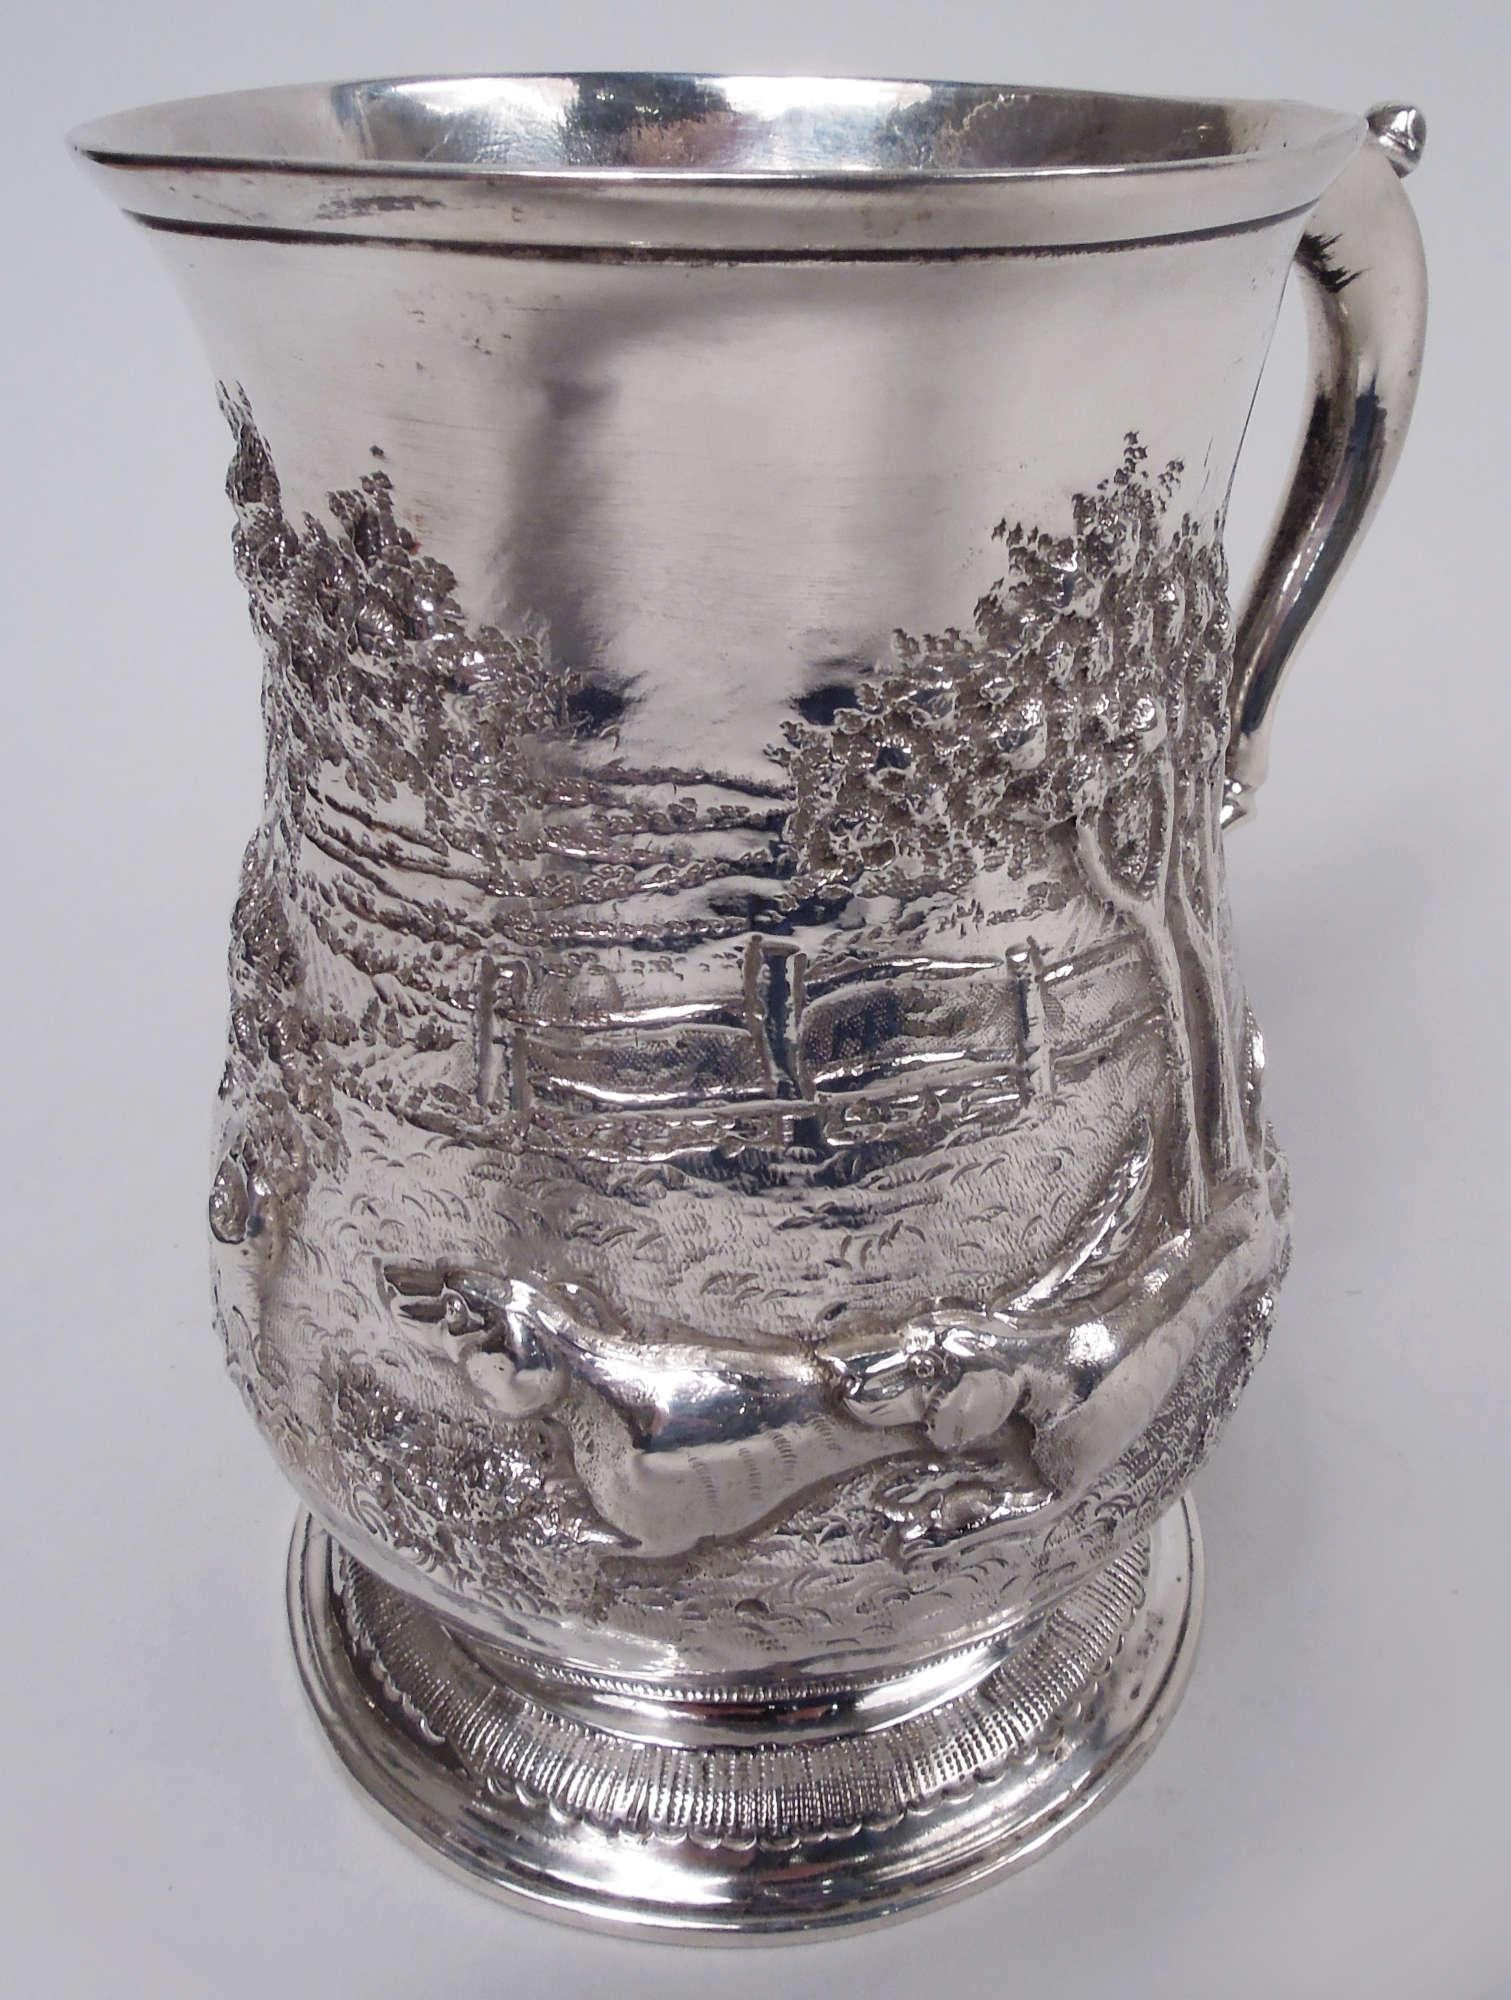 George II sterling silver mug. Made by Samuel Welles in London in 1759. Baluster bowl with leaf-capped double-scroll handle. Raised foot with tooled leaf border. Chased and engraved bucolic scene with hounds racing through an orchard. A later